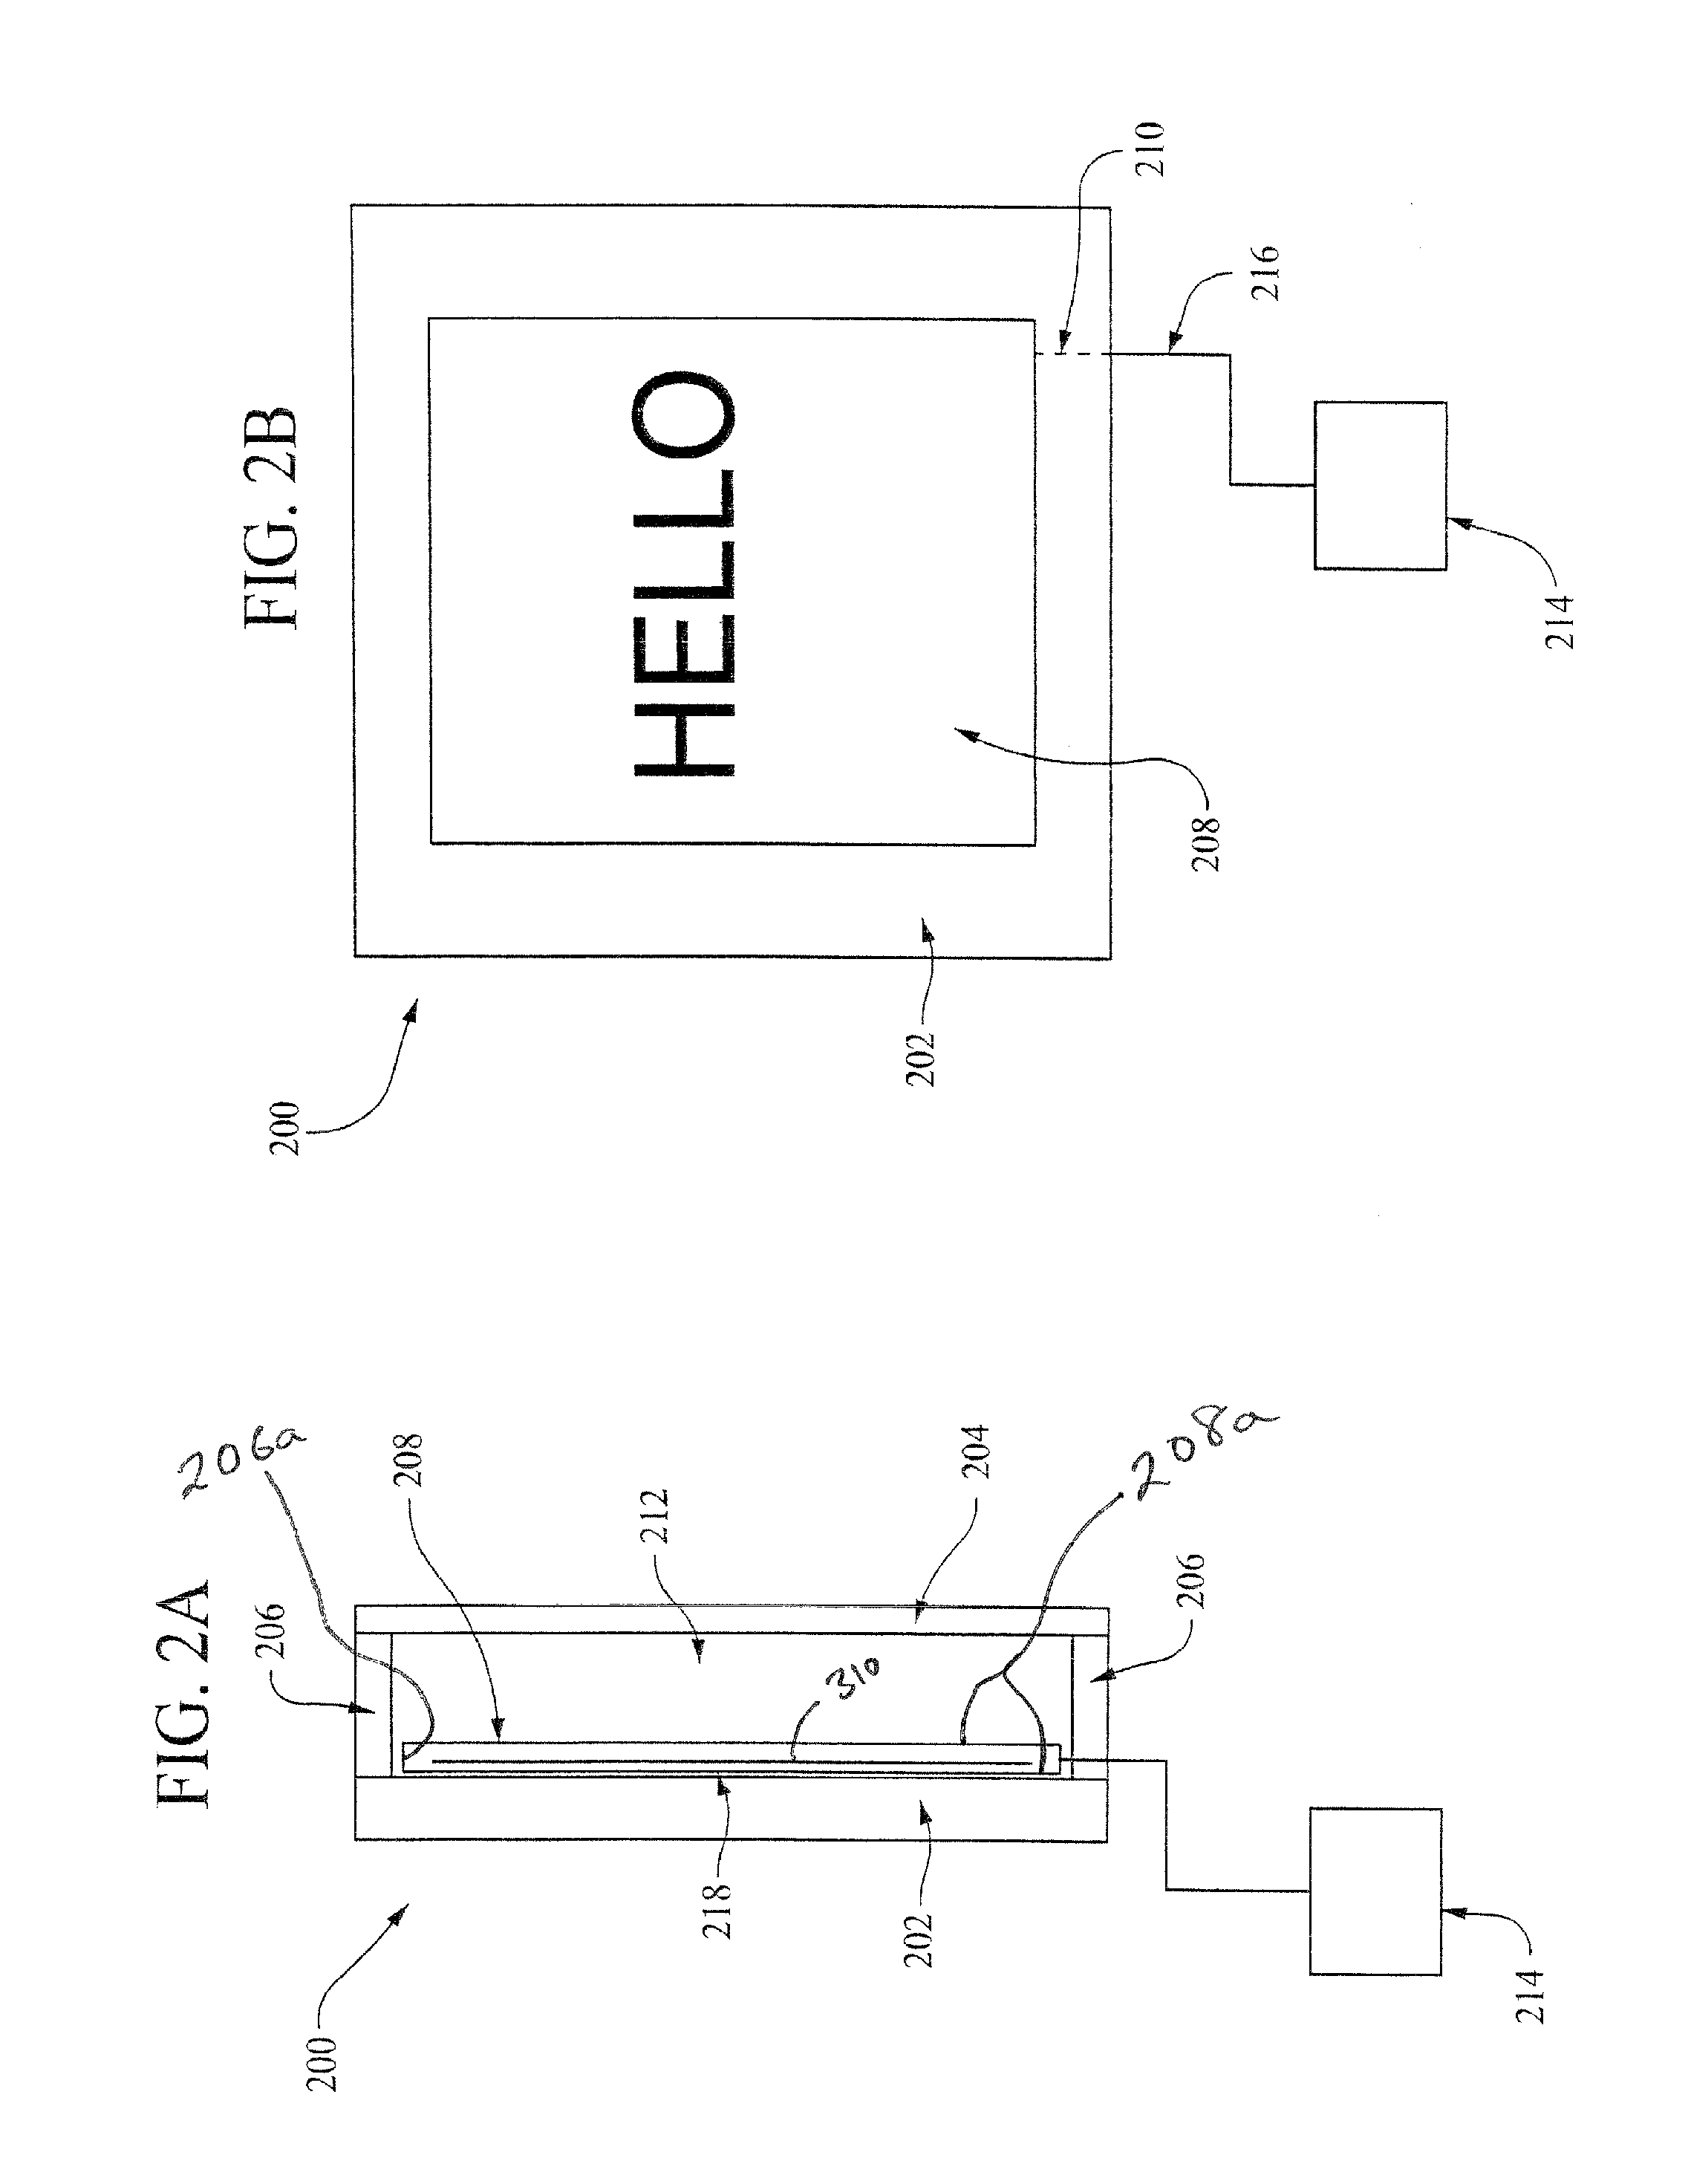 Insulated glass units incorporating emitters, and/or methods of making the same